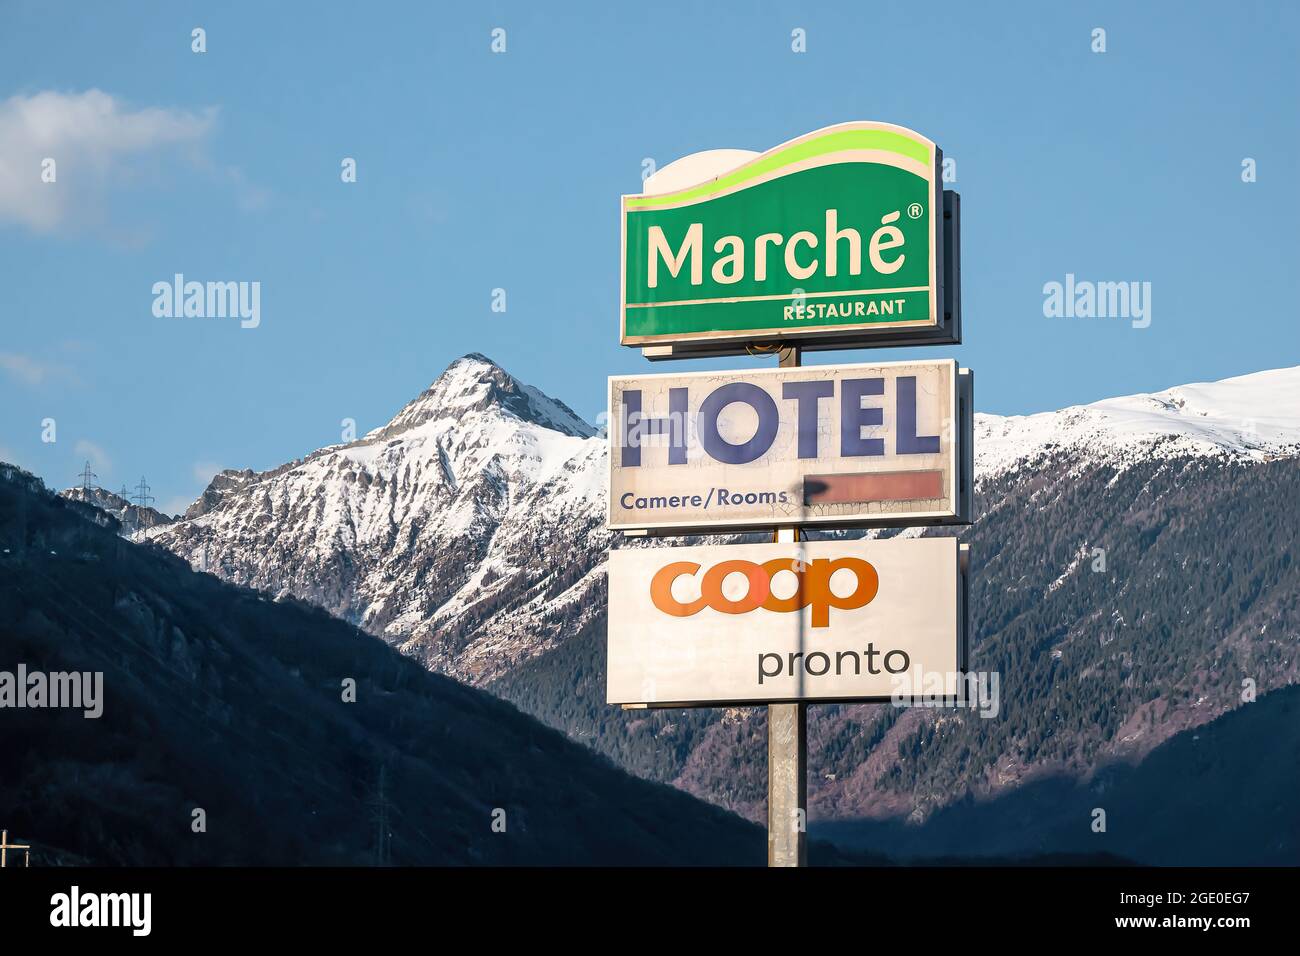 BELLINZONA, SWITZERLAND - MARCH 7, 2020: The Marche represents a highway chain of restaurants owned by the Swiss trading company Coop. Stock Photo